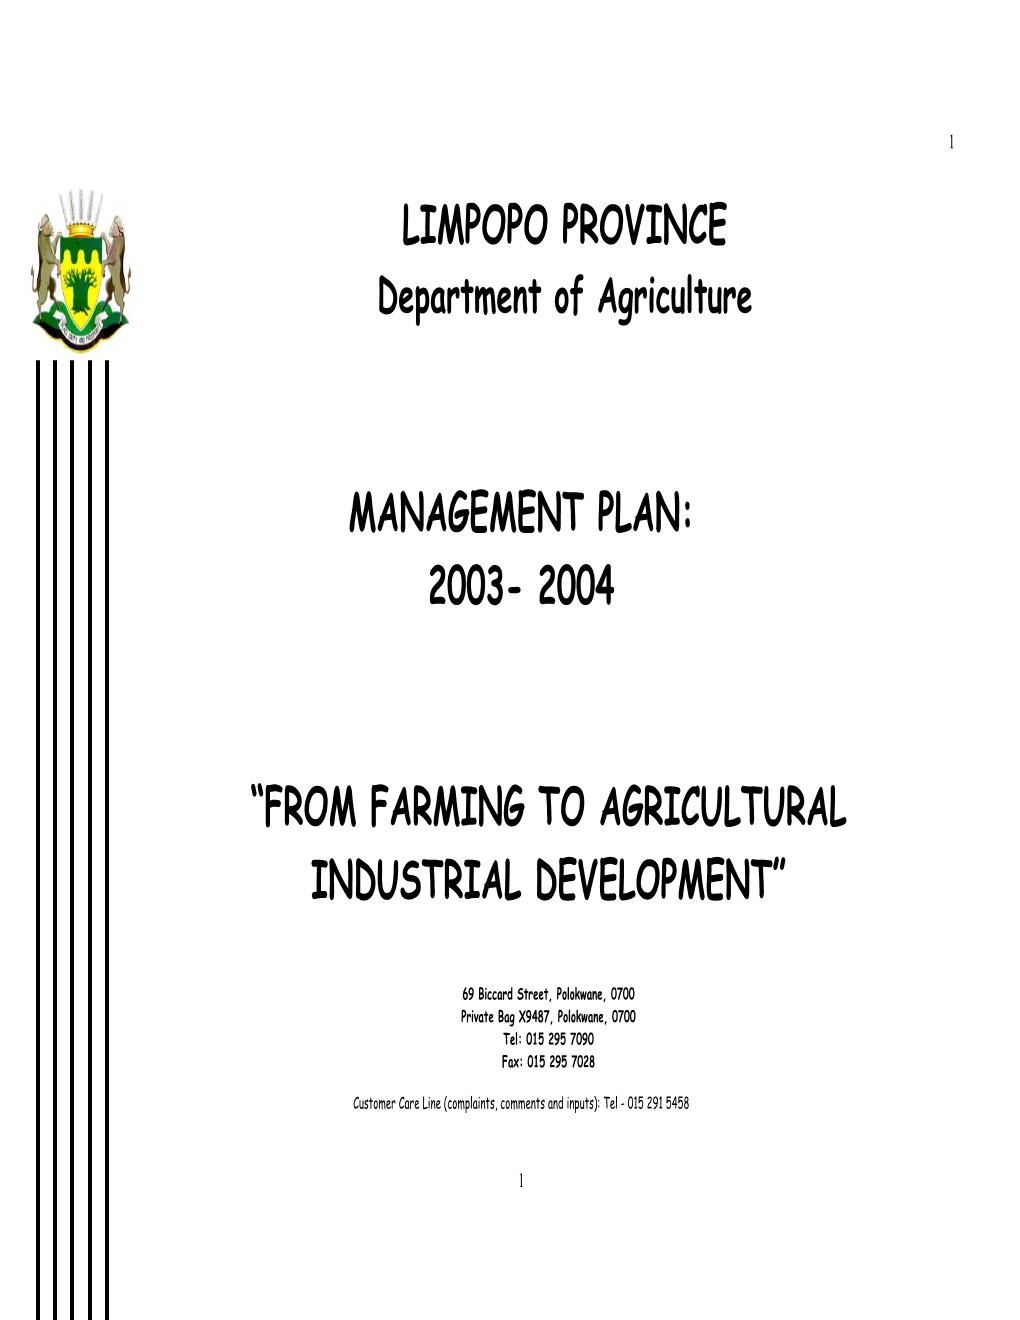 Limpopo Province Management Plan: 2003- 2004 “From Farming to Agricultural Industrial Development”